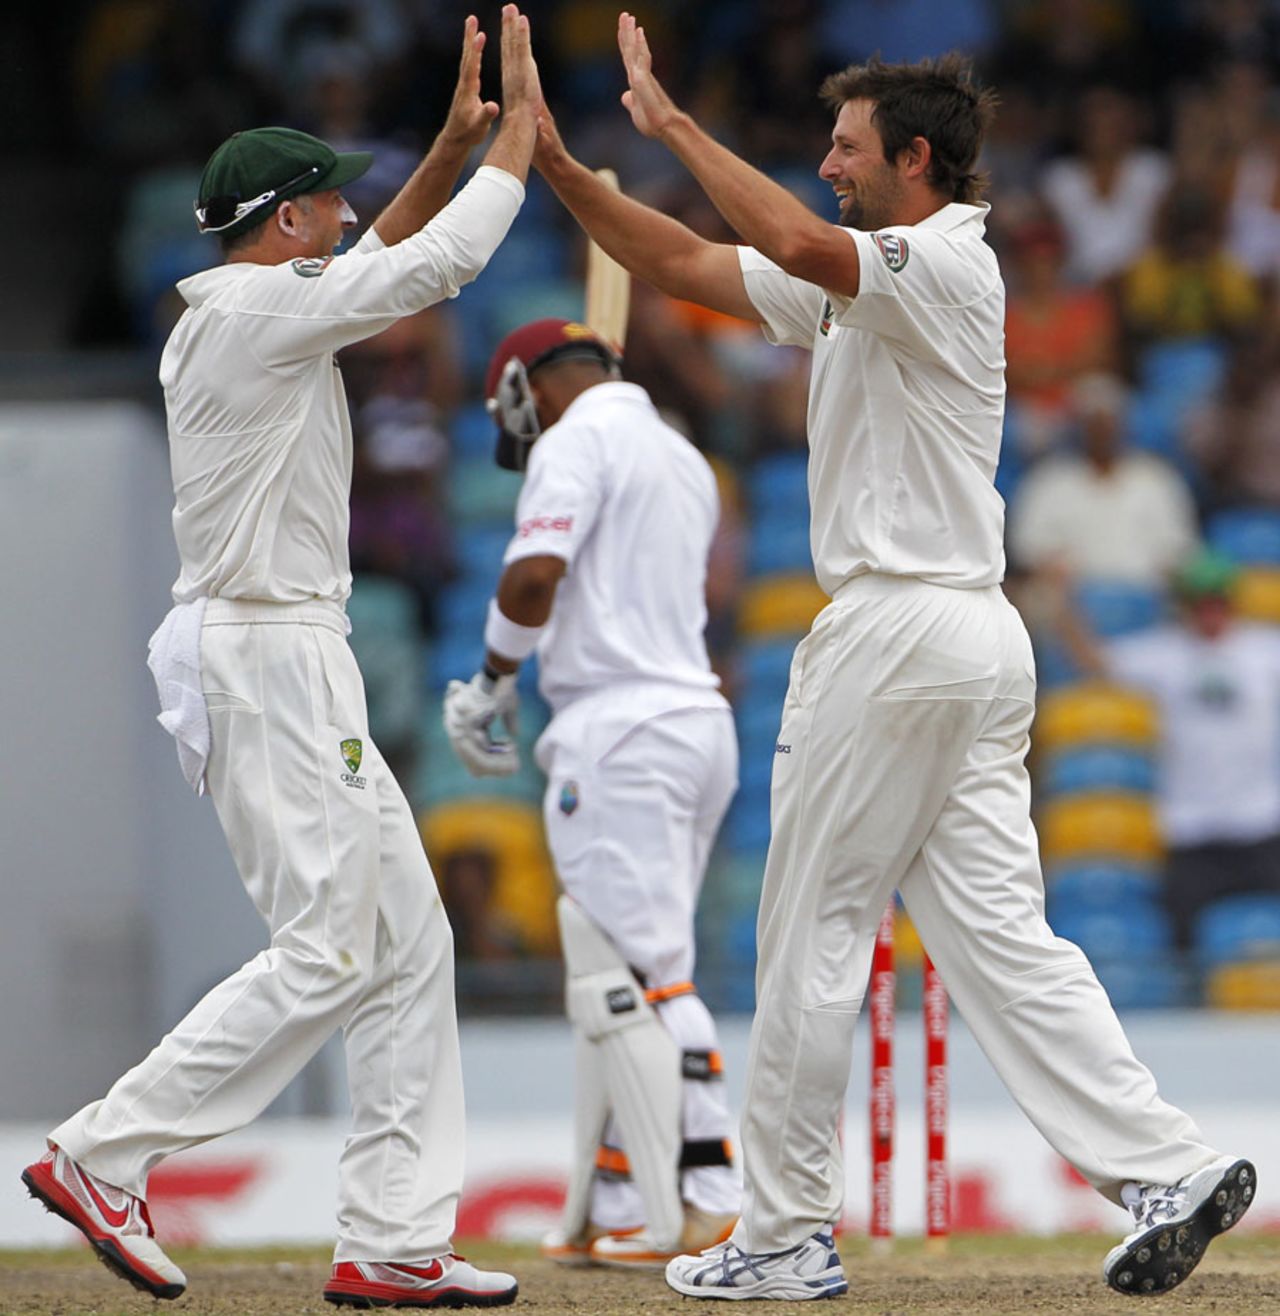 Mike Hussey and Ben Hilfenhaus celebrate the wicket of Carlton Baugh, West Indies v Australia, 1st Test, Barbados, 5th day, April 11, 2012